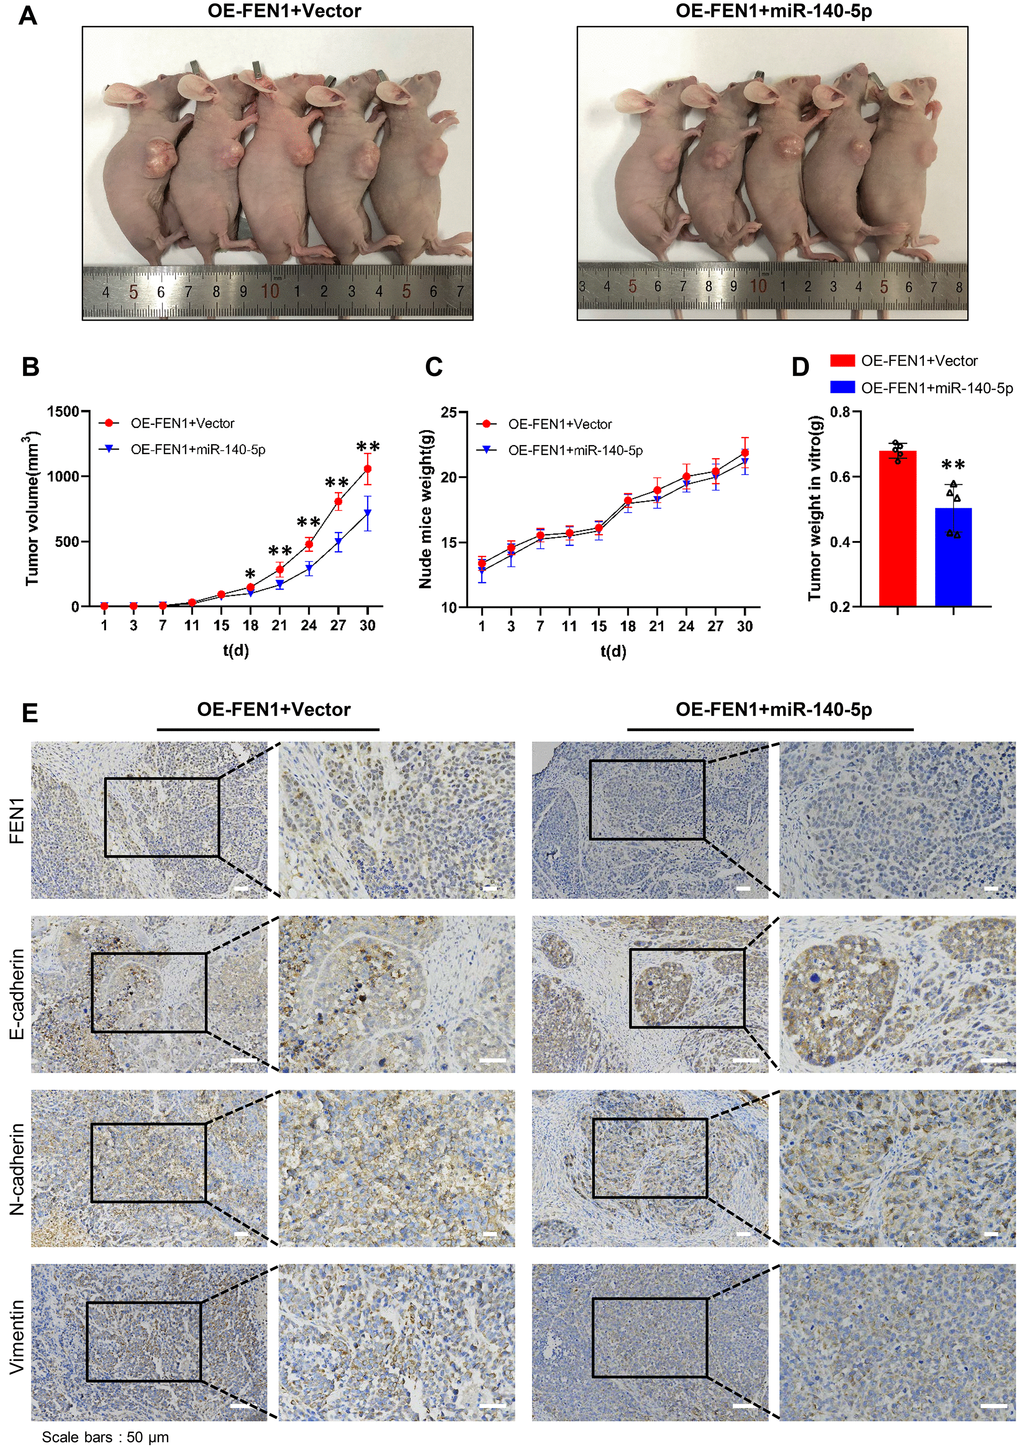 miR-140-5p partially reverses the effect of FEN1 in vivo. (A) Images of nude mice bearing subcutaneous tumor xenografts. (B) Xenograft tumor growth curves; n = 5 per group, *P P C) Weight growth curves of nude mice, n = 5 per group. (D) Weights of tumors derived from euthanized nude mice at the endpoint; n = 5 per group, **P E) IHC staining of FEN1 and EMT markers such as E-cadherin, N-cadherin and vimentin in xenograft tumor tissues; original magnification, 200 x for the upper panels and 400 x for the lower panels in each figure.